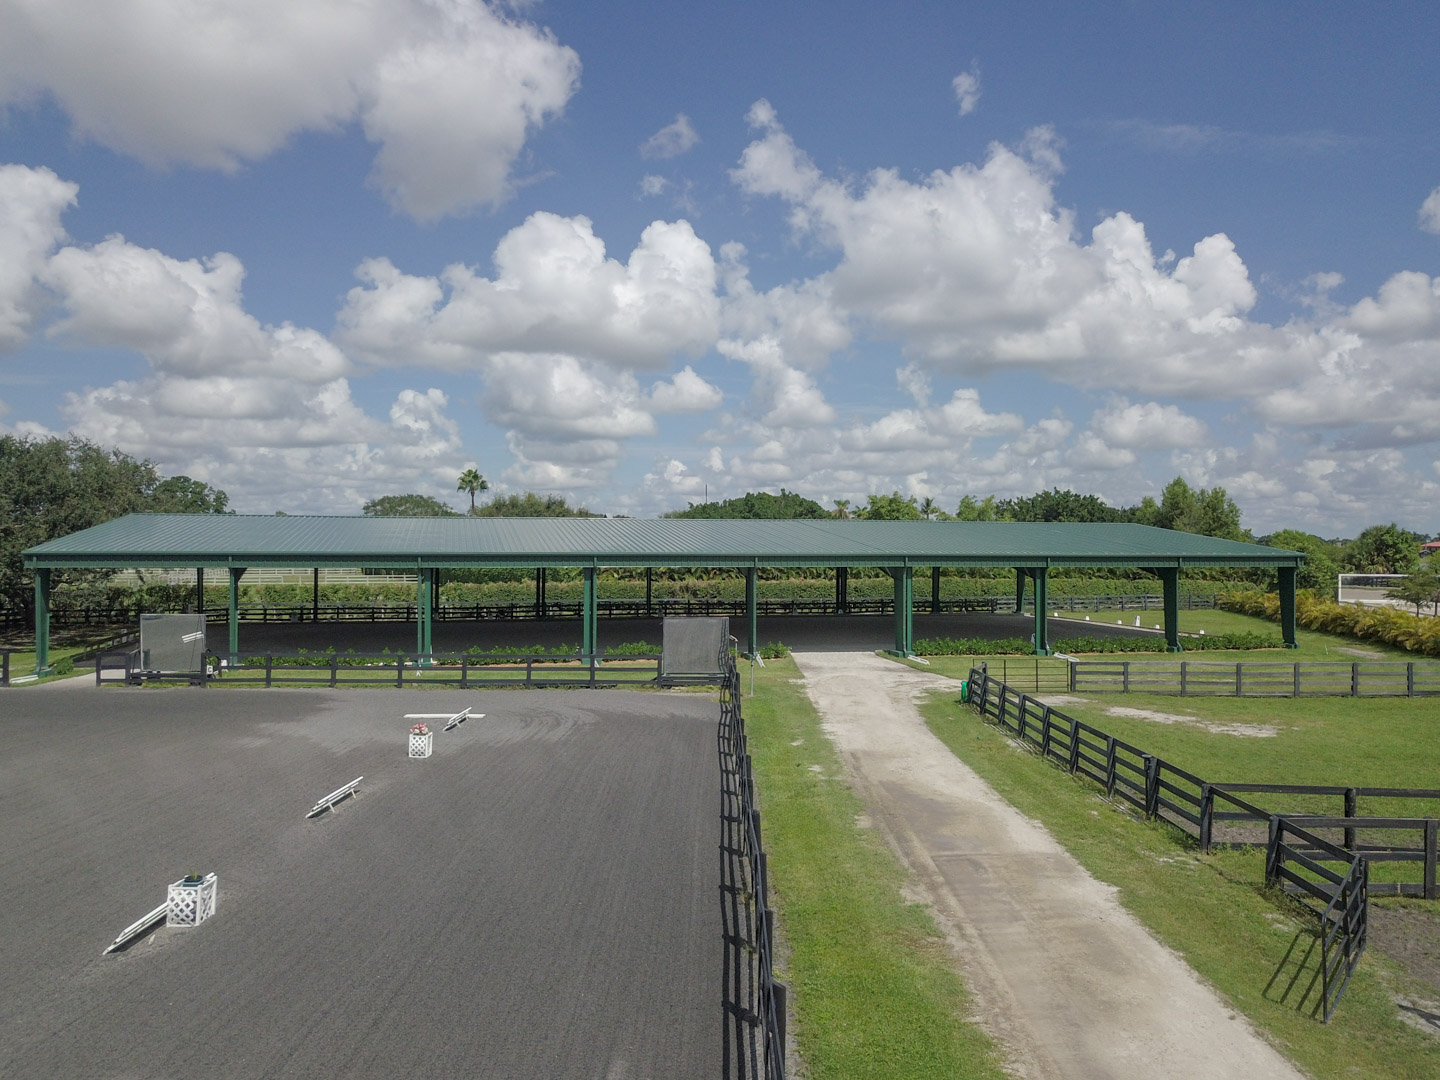 Steel Riding Arena for Equestrian